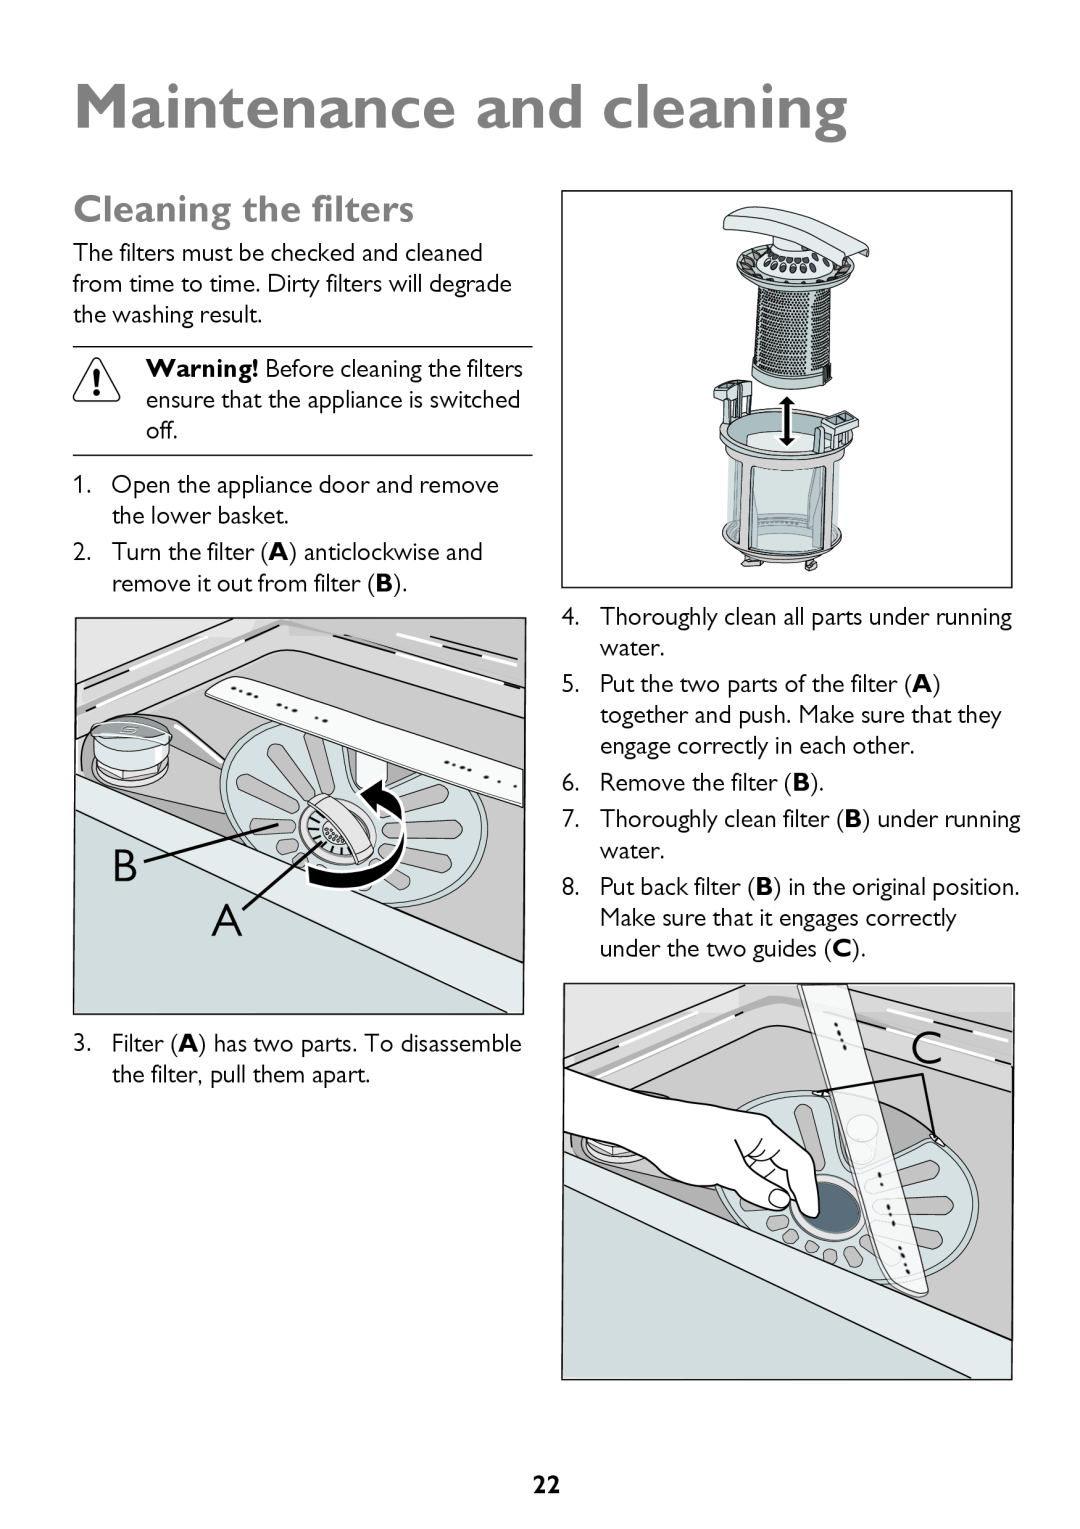 John Lewis JLDW 1221 instruction manual Maintenance and cleaning, Cleaning the filters 